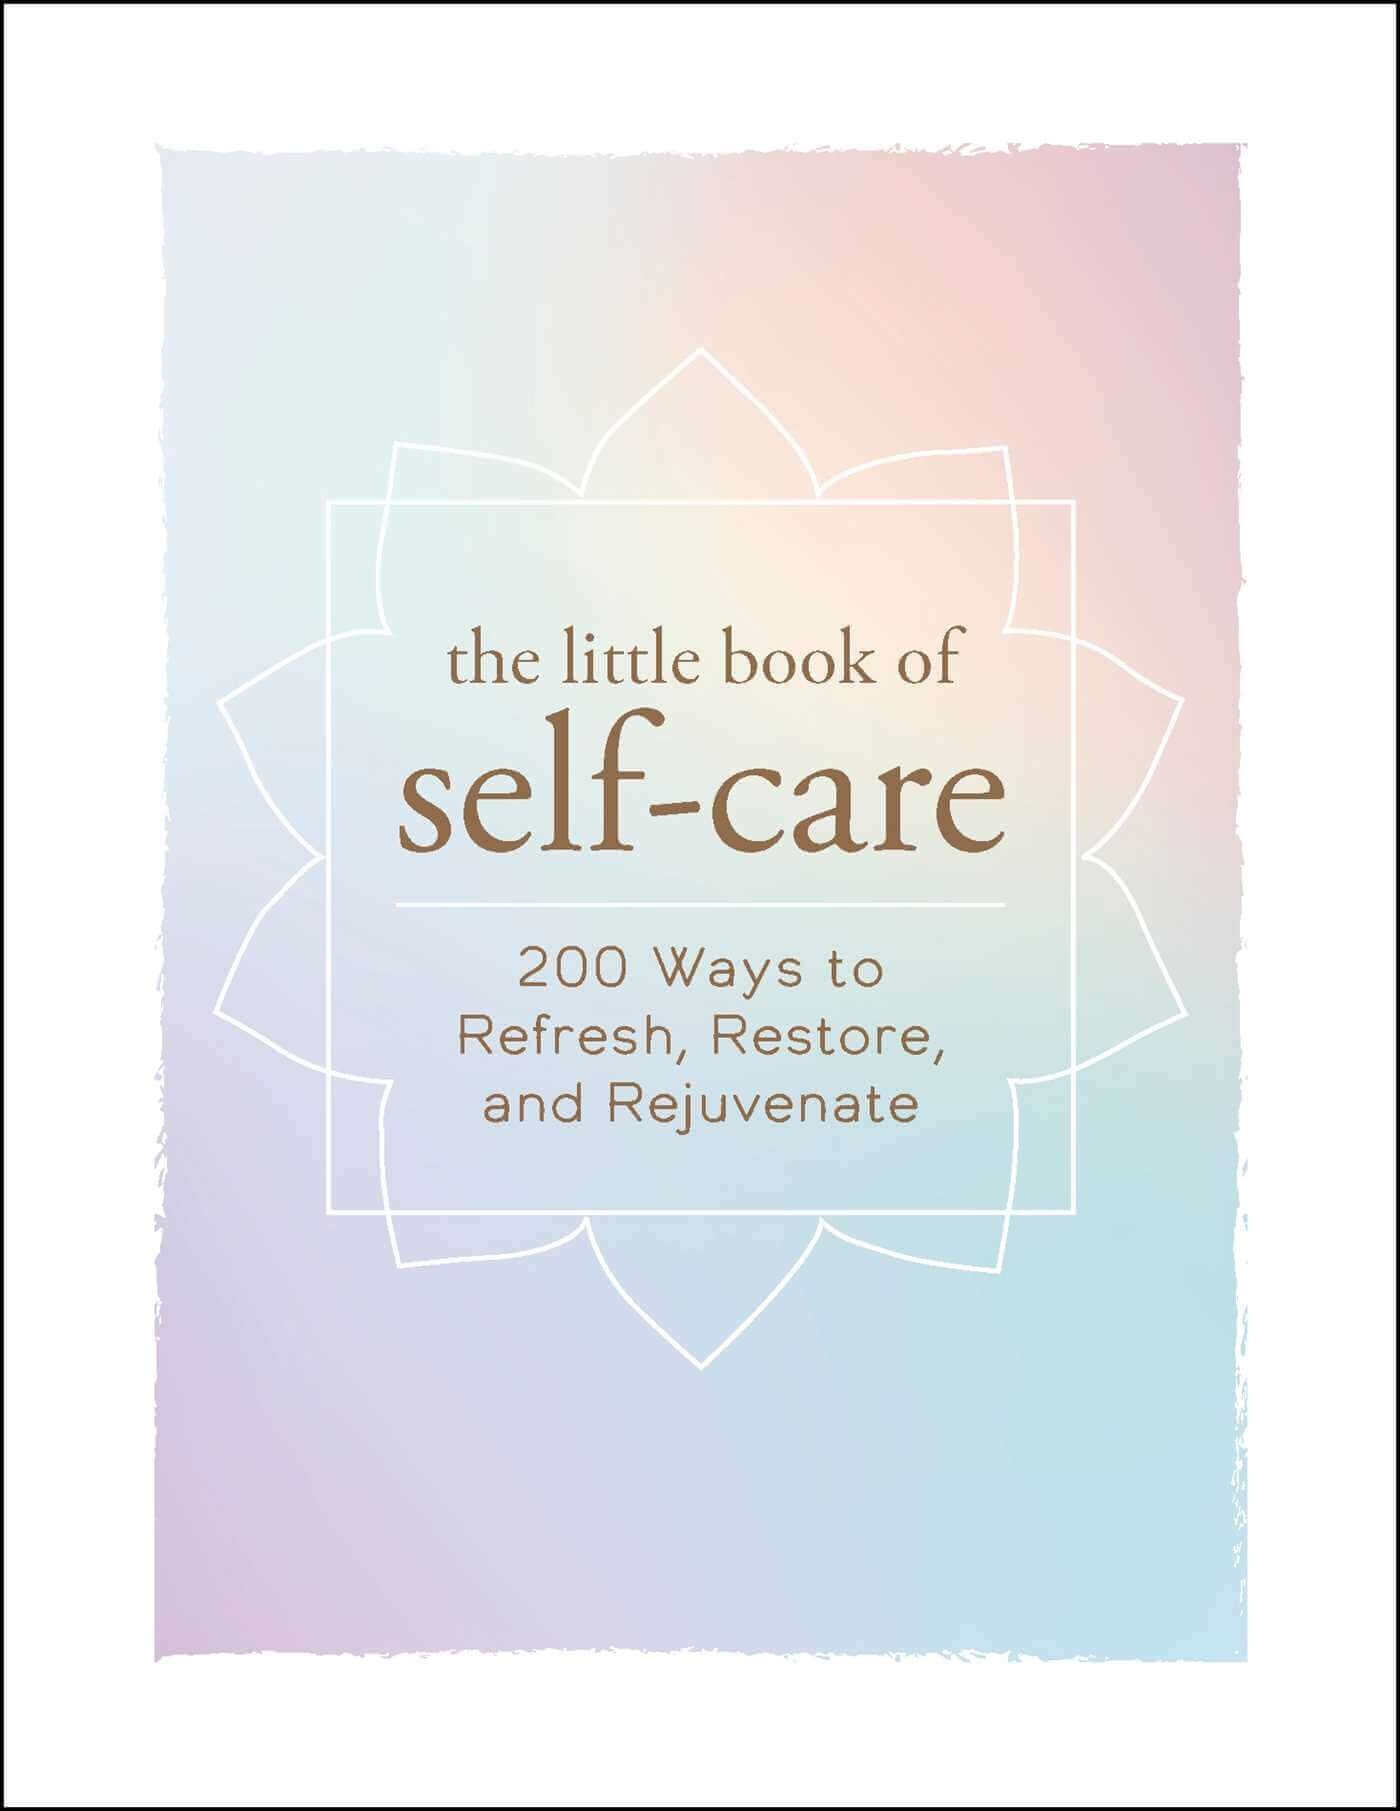 The Little Book of Self-Care: 200 Ways to Refresh, Restore, and Rejuvenate at $19.99 only from Spiral Rain